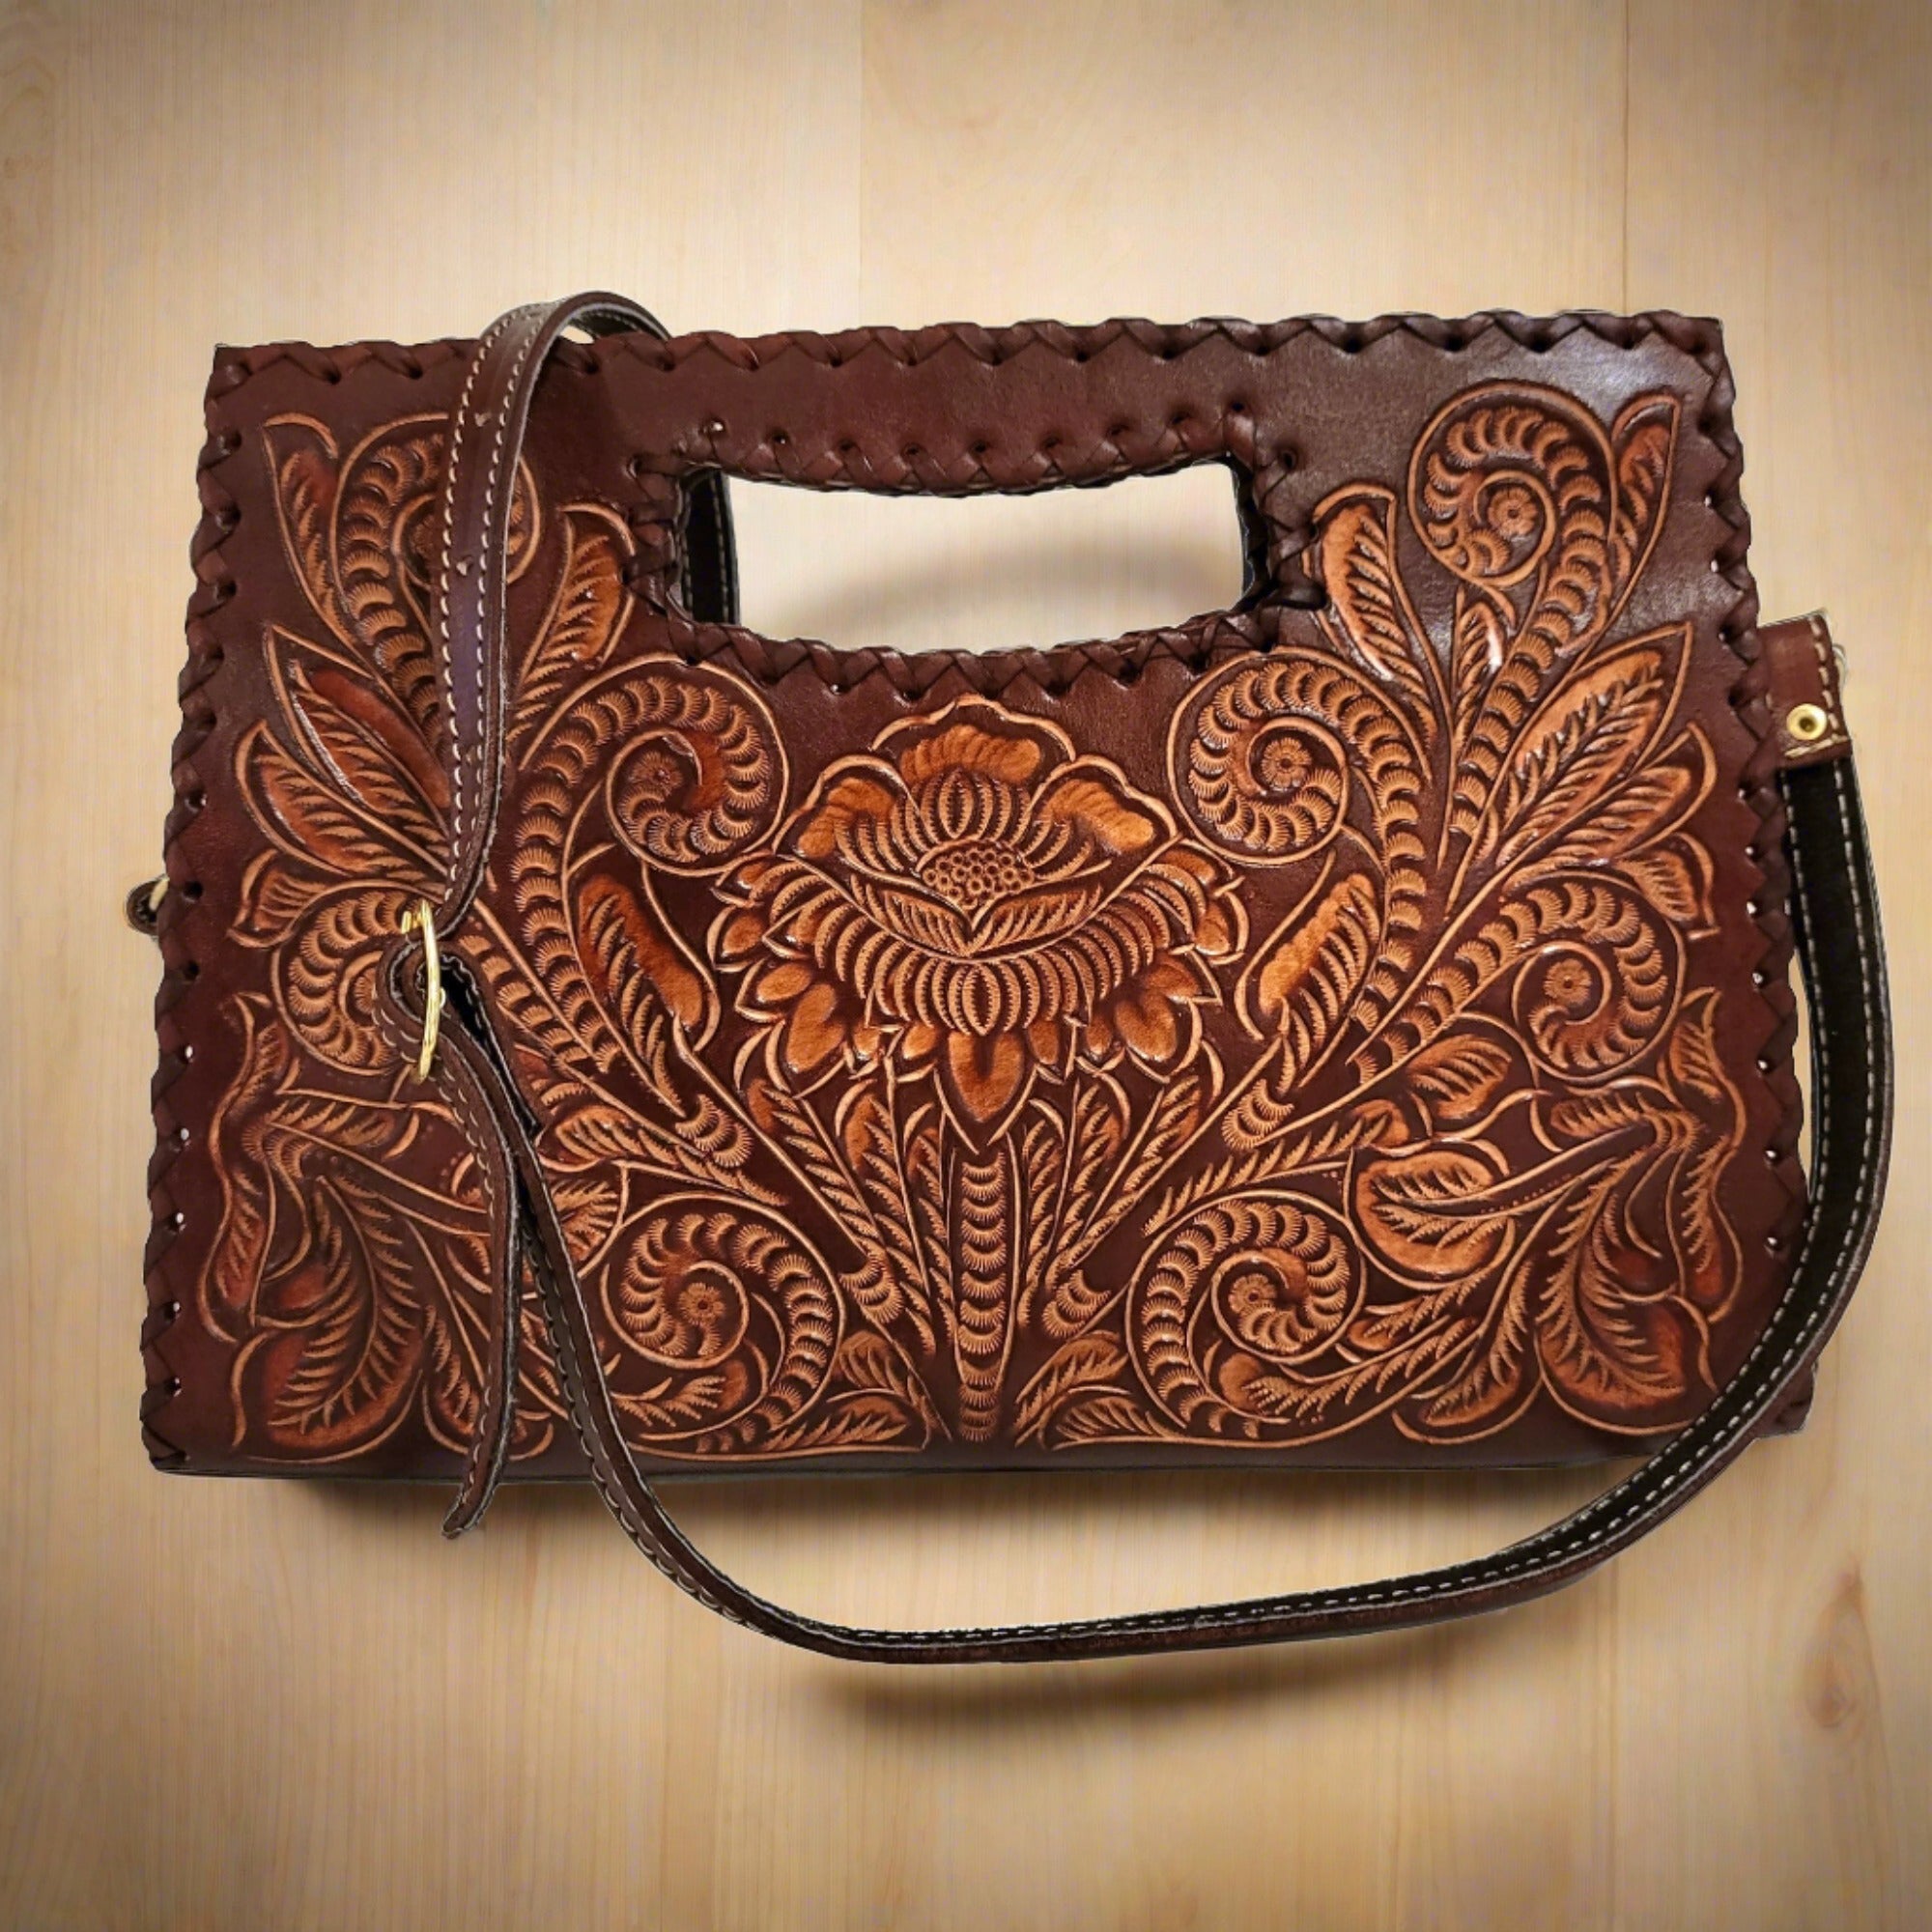 Hand tooled leather bag for women handmade from genuine veg-tan leather,  shoulder leather bag for her.